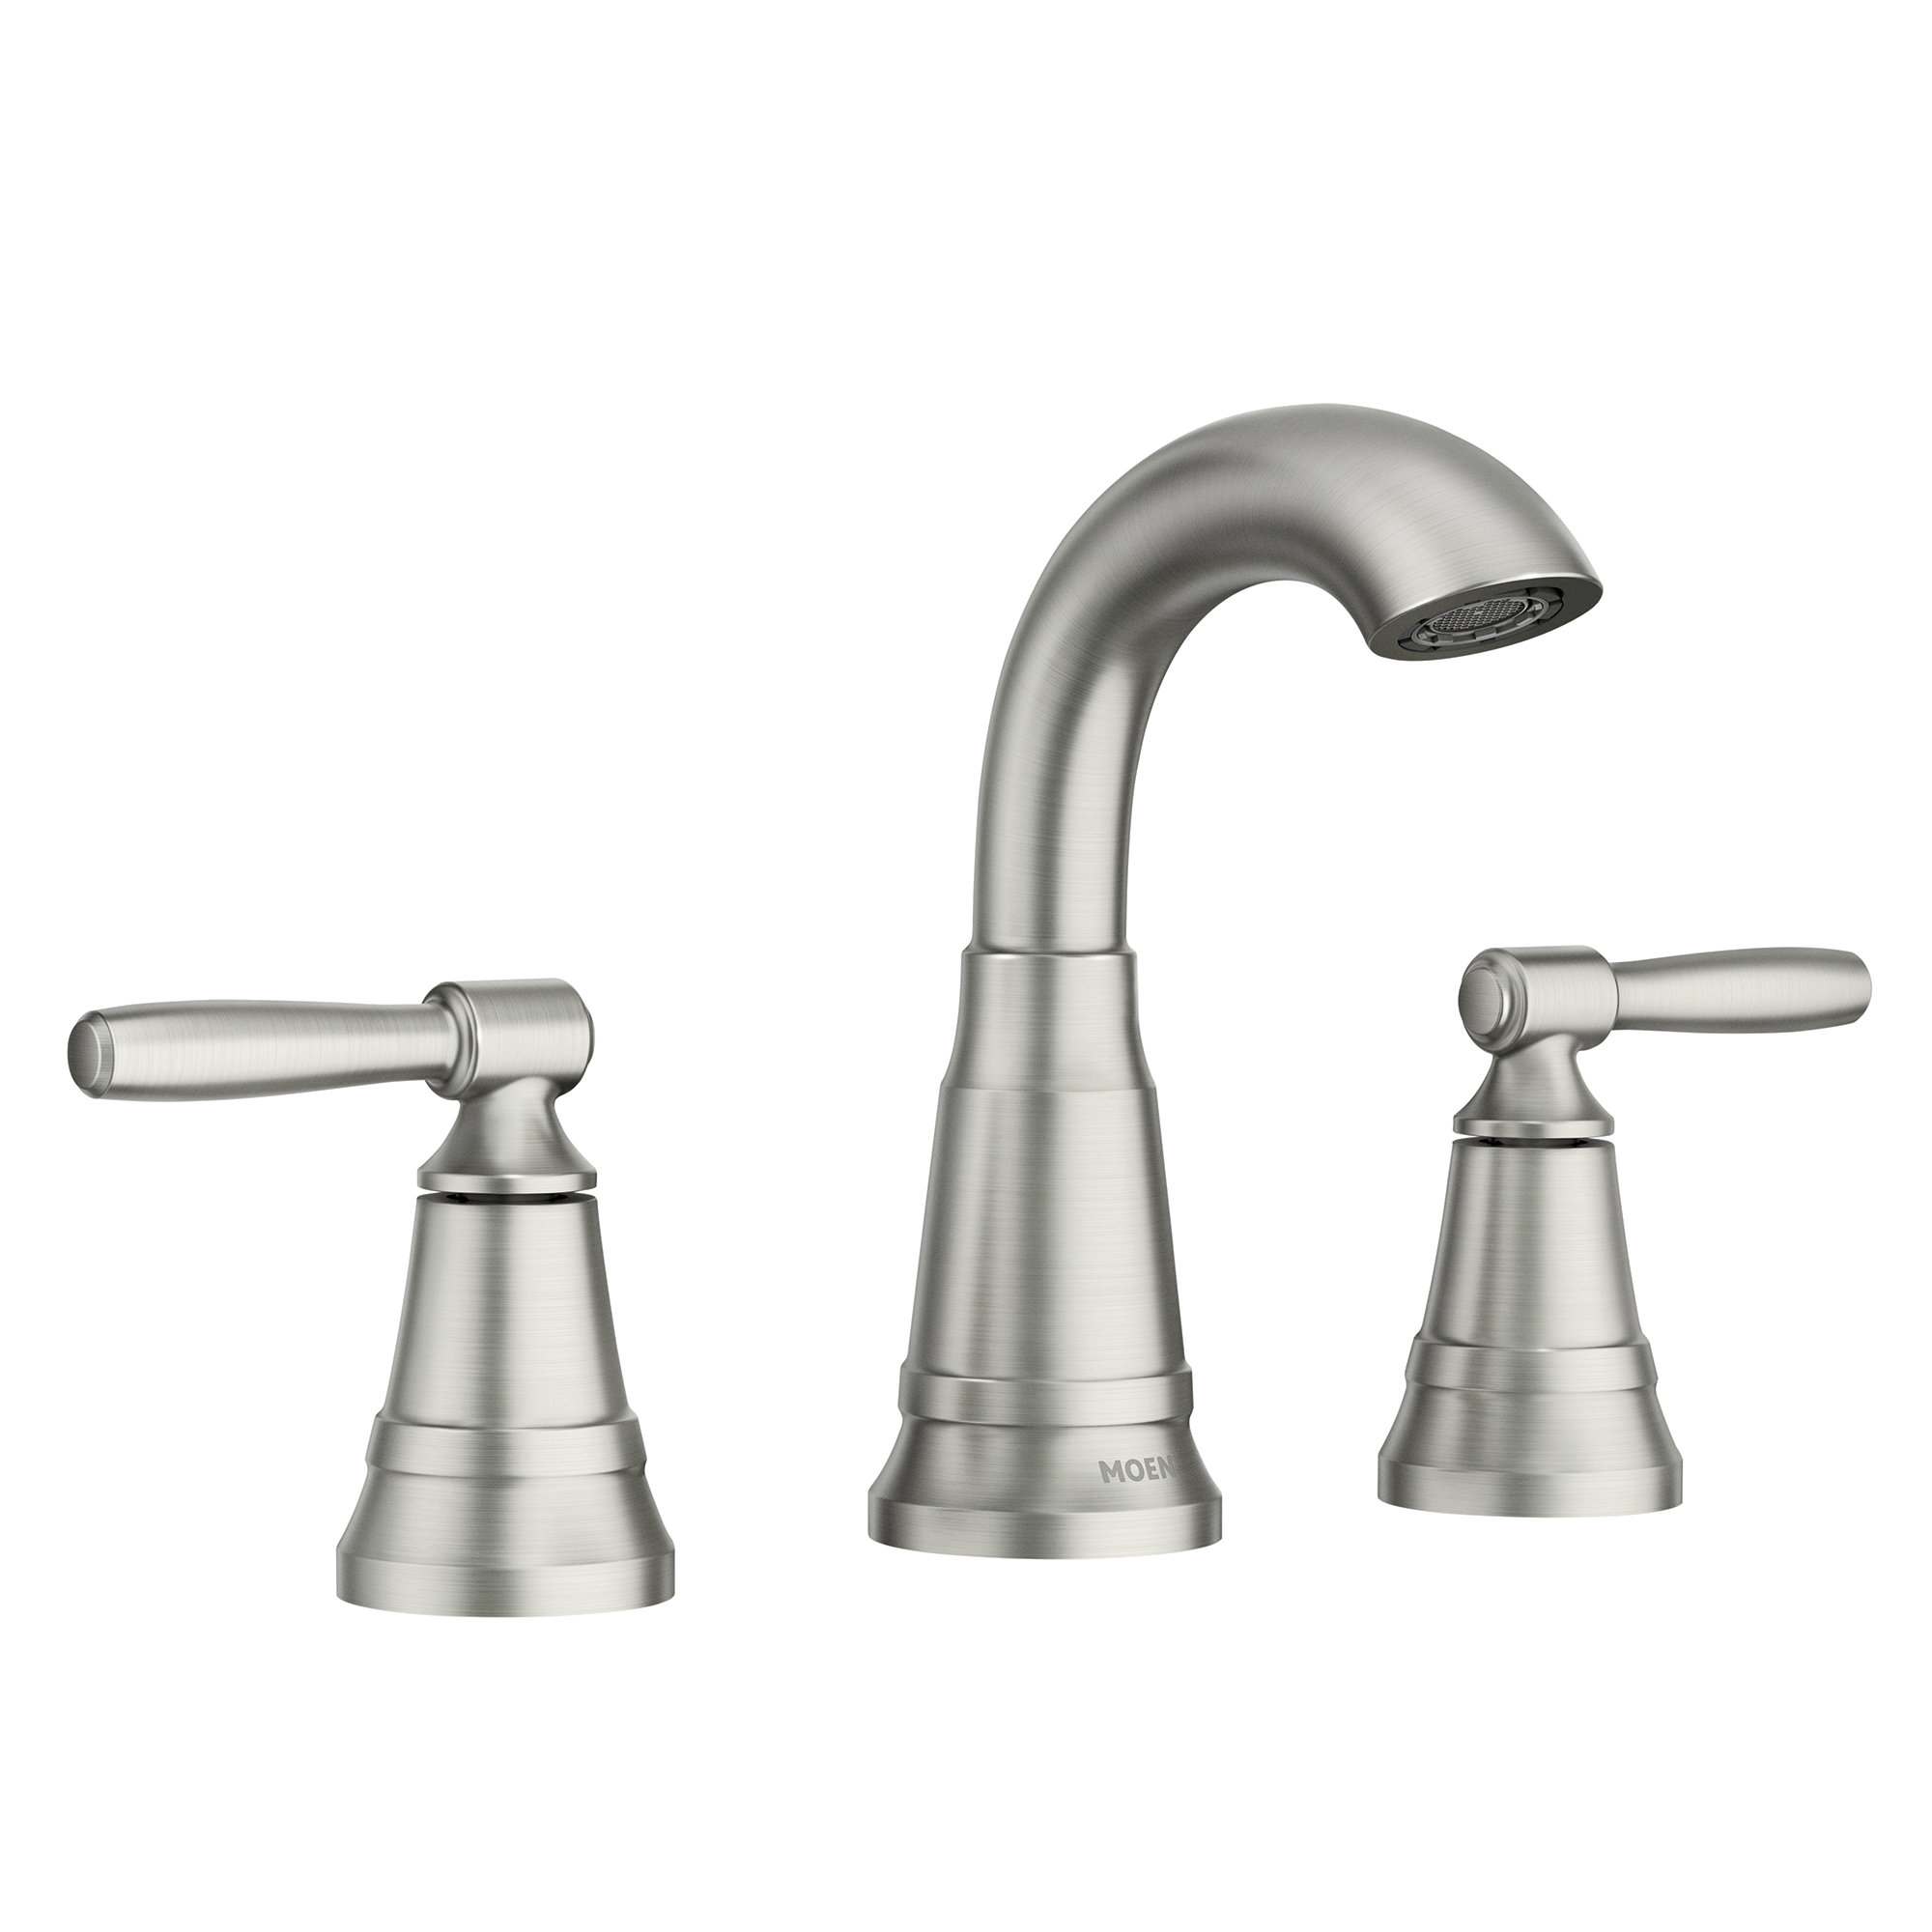 Moen Halle Widespread Bathroom Faucet with Drain Assembly & Reviews